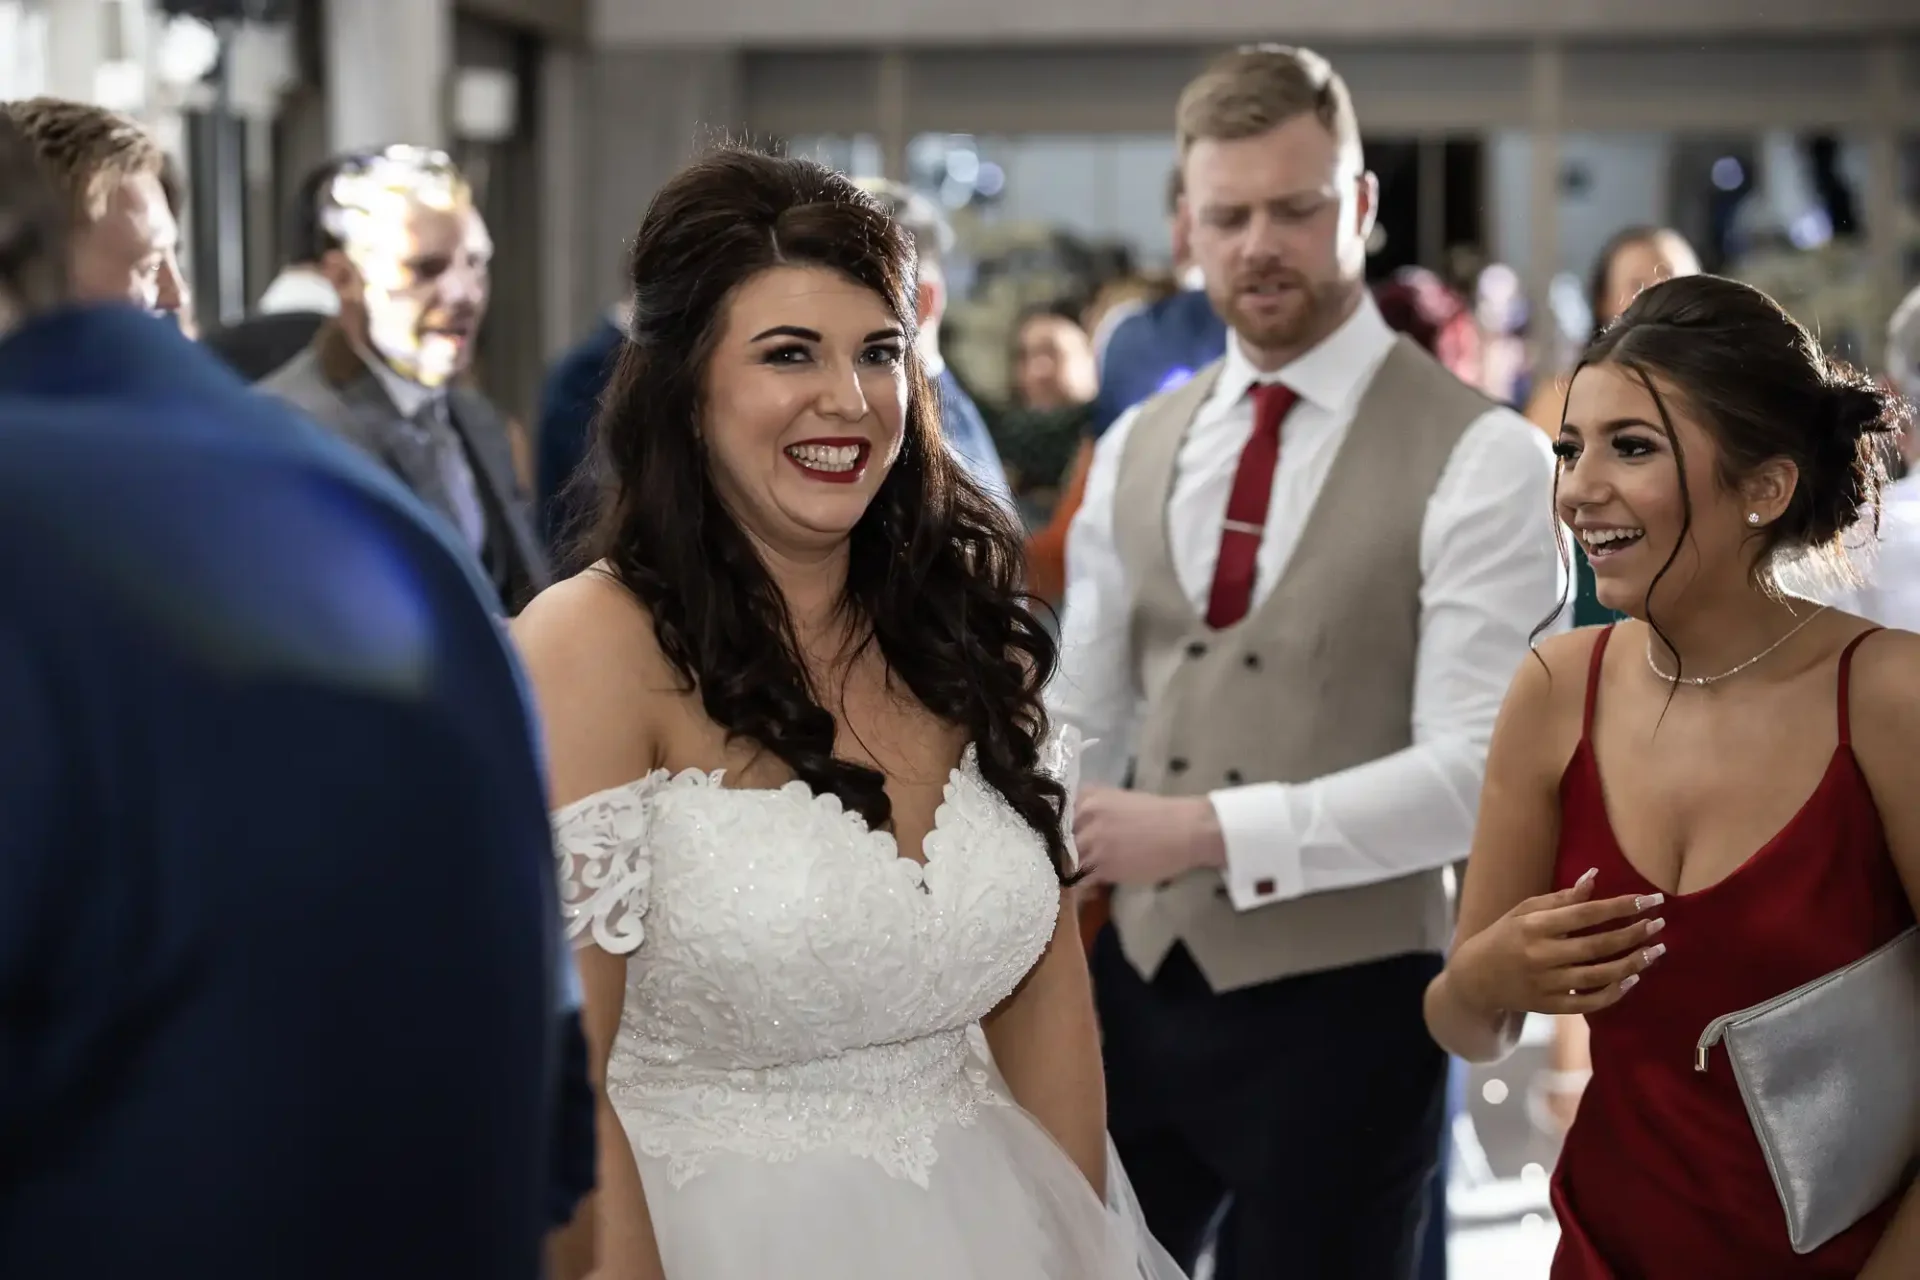 A bride in a white dress laughs with a woman in a green dress at a wedding reception, with a man in a vest and tie walking beside them.